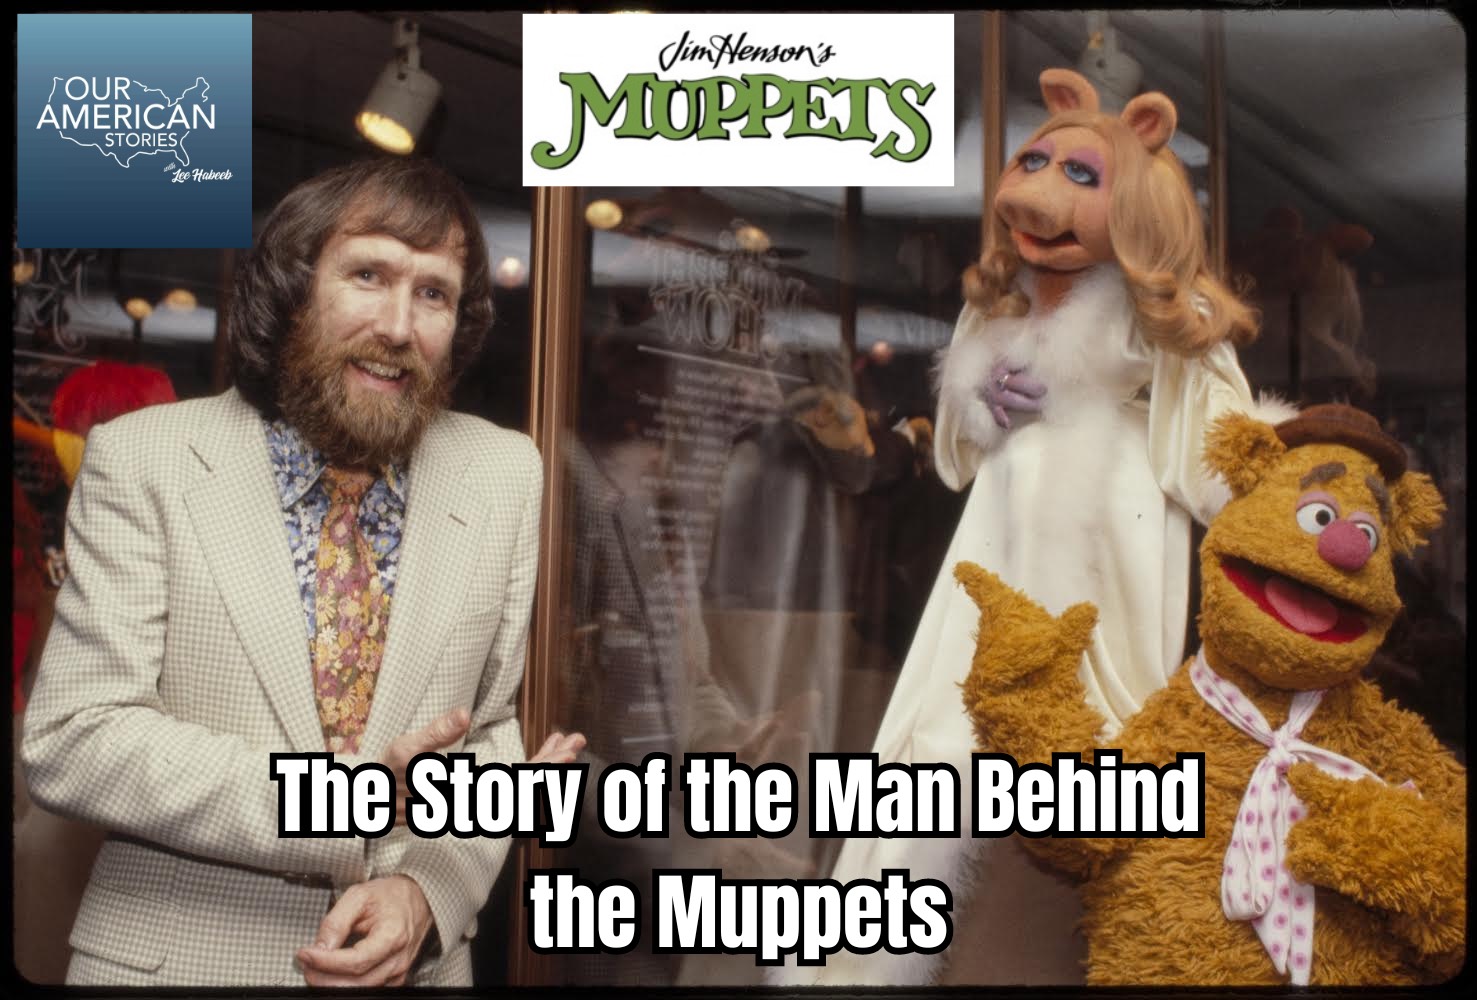 Jim Henson: The Story of the Man Behind the Muppets